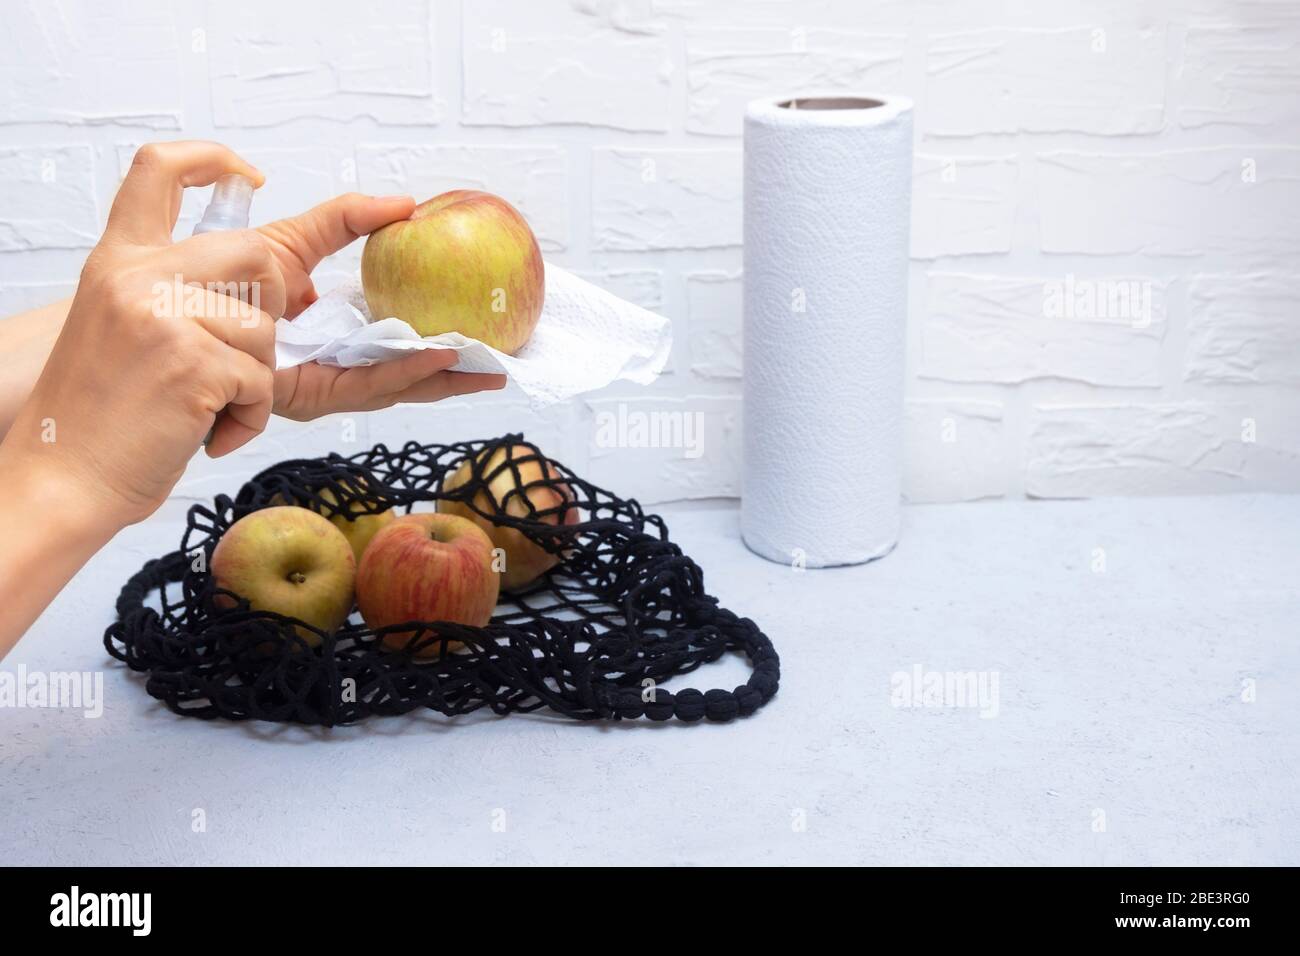 Woman hands holding sanitizer and cleaning groceries in kitchen with mesh bag on background. Coronavirus food safety concept Stock Photo